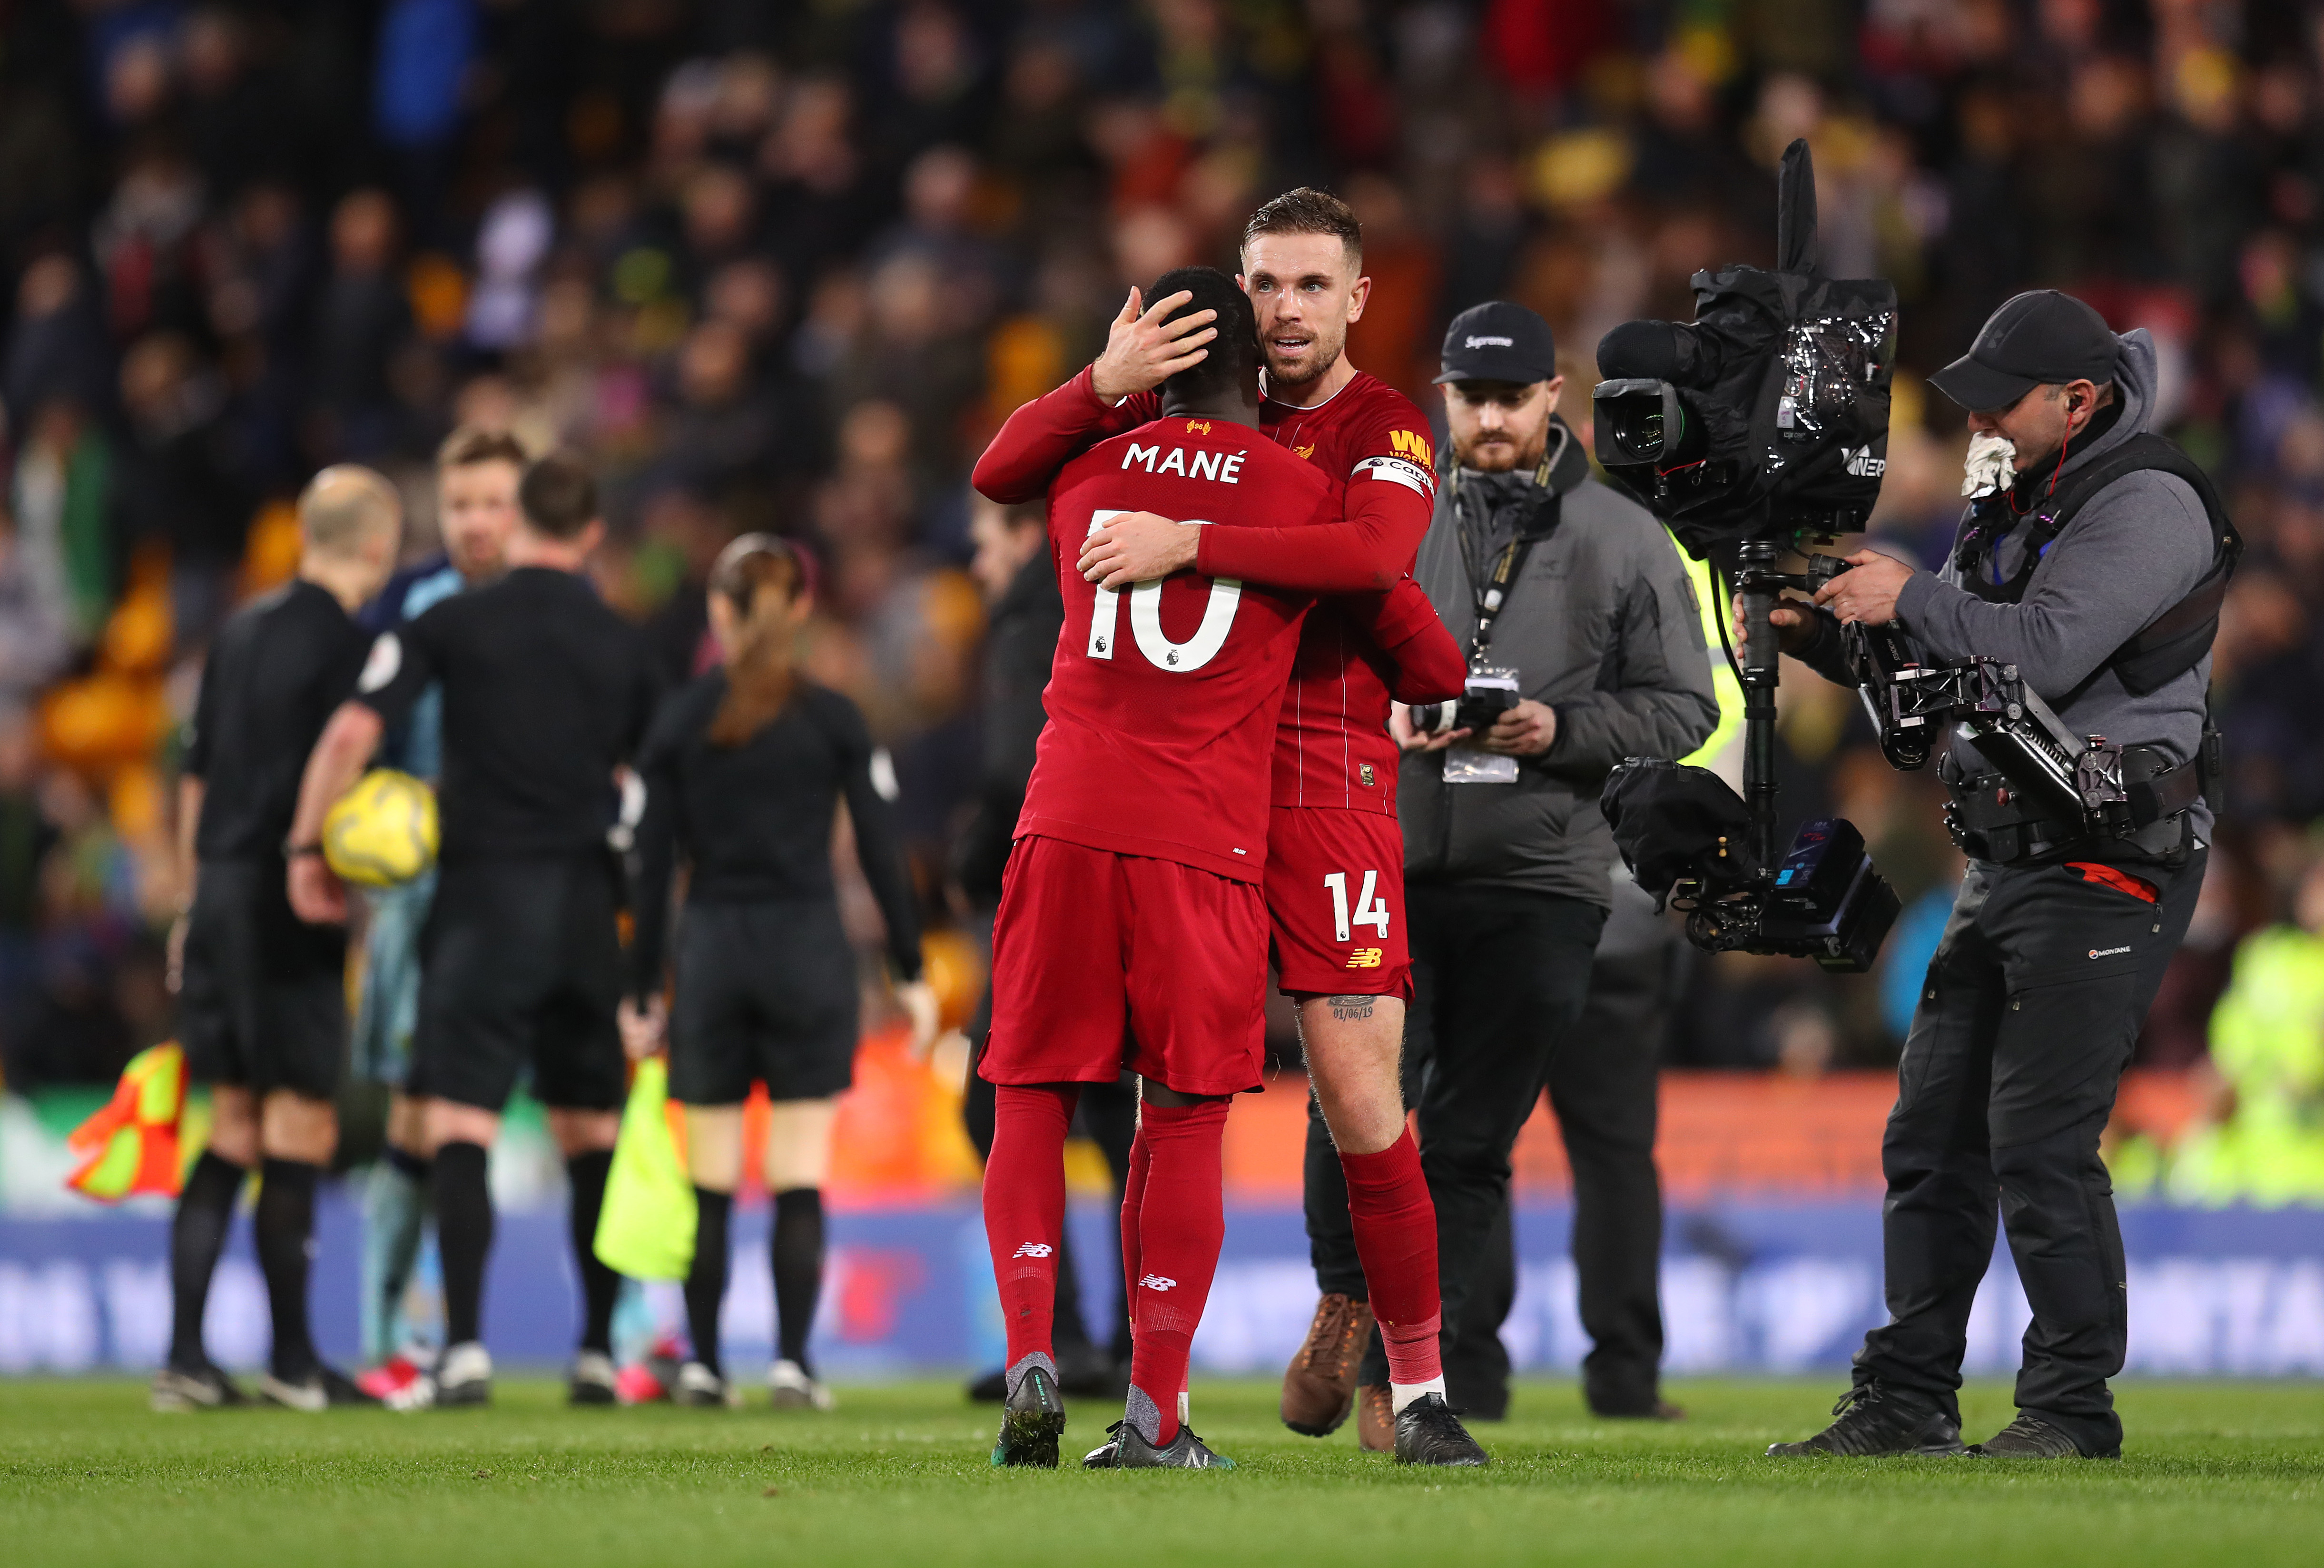 NORWICH, ENGLAND - FEBRUARY 15: Sadio Mane and Jordan Henderson of Liverpool celebrate following their sides victory in the Premier League match between Norwich City and Liverpool FC at Carrow Road on February 15, 2020 in Norwich, United Kingdom. (Photo by Catherine Ivill/Getty Images)